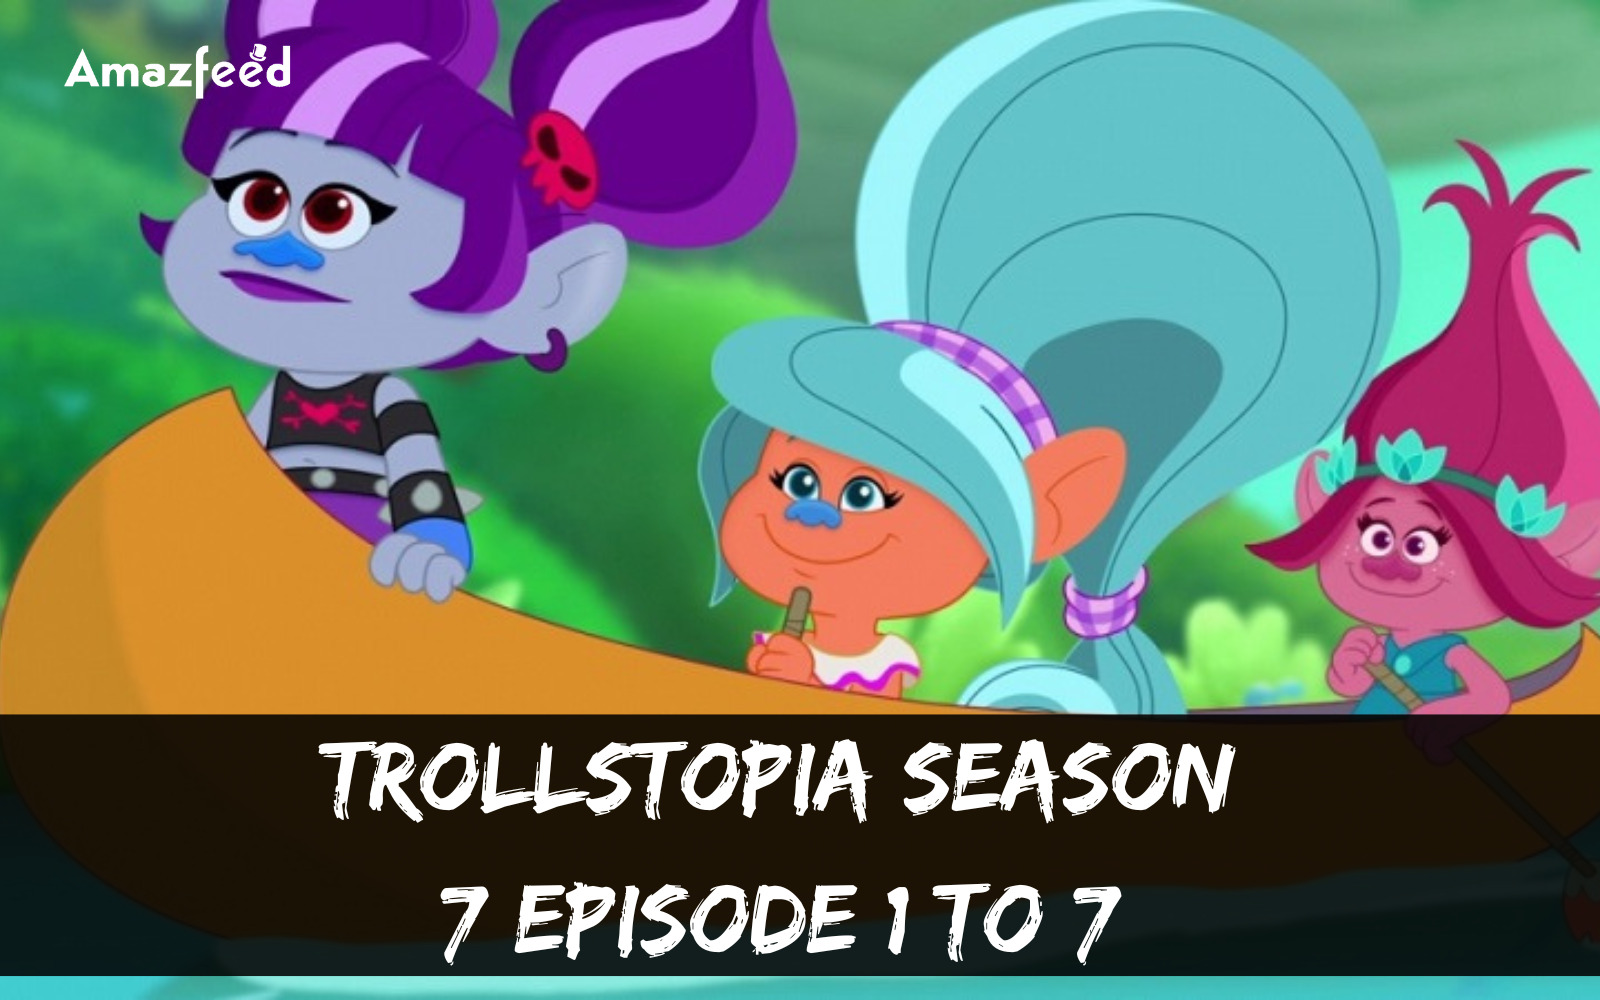 What can you expect from Trollstopia Season 7 episode 1 to 7